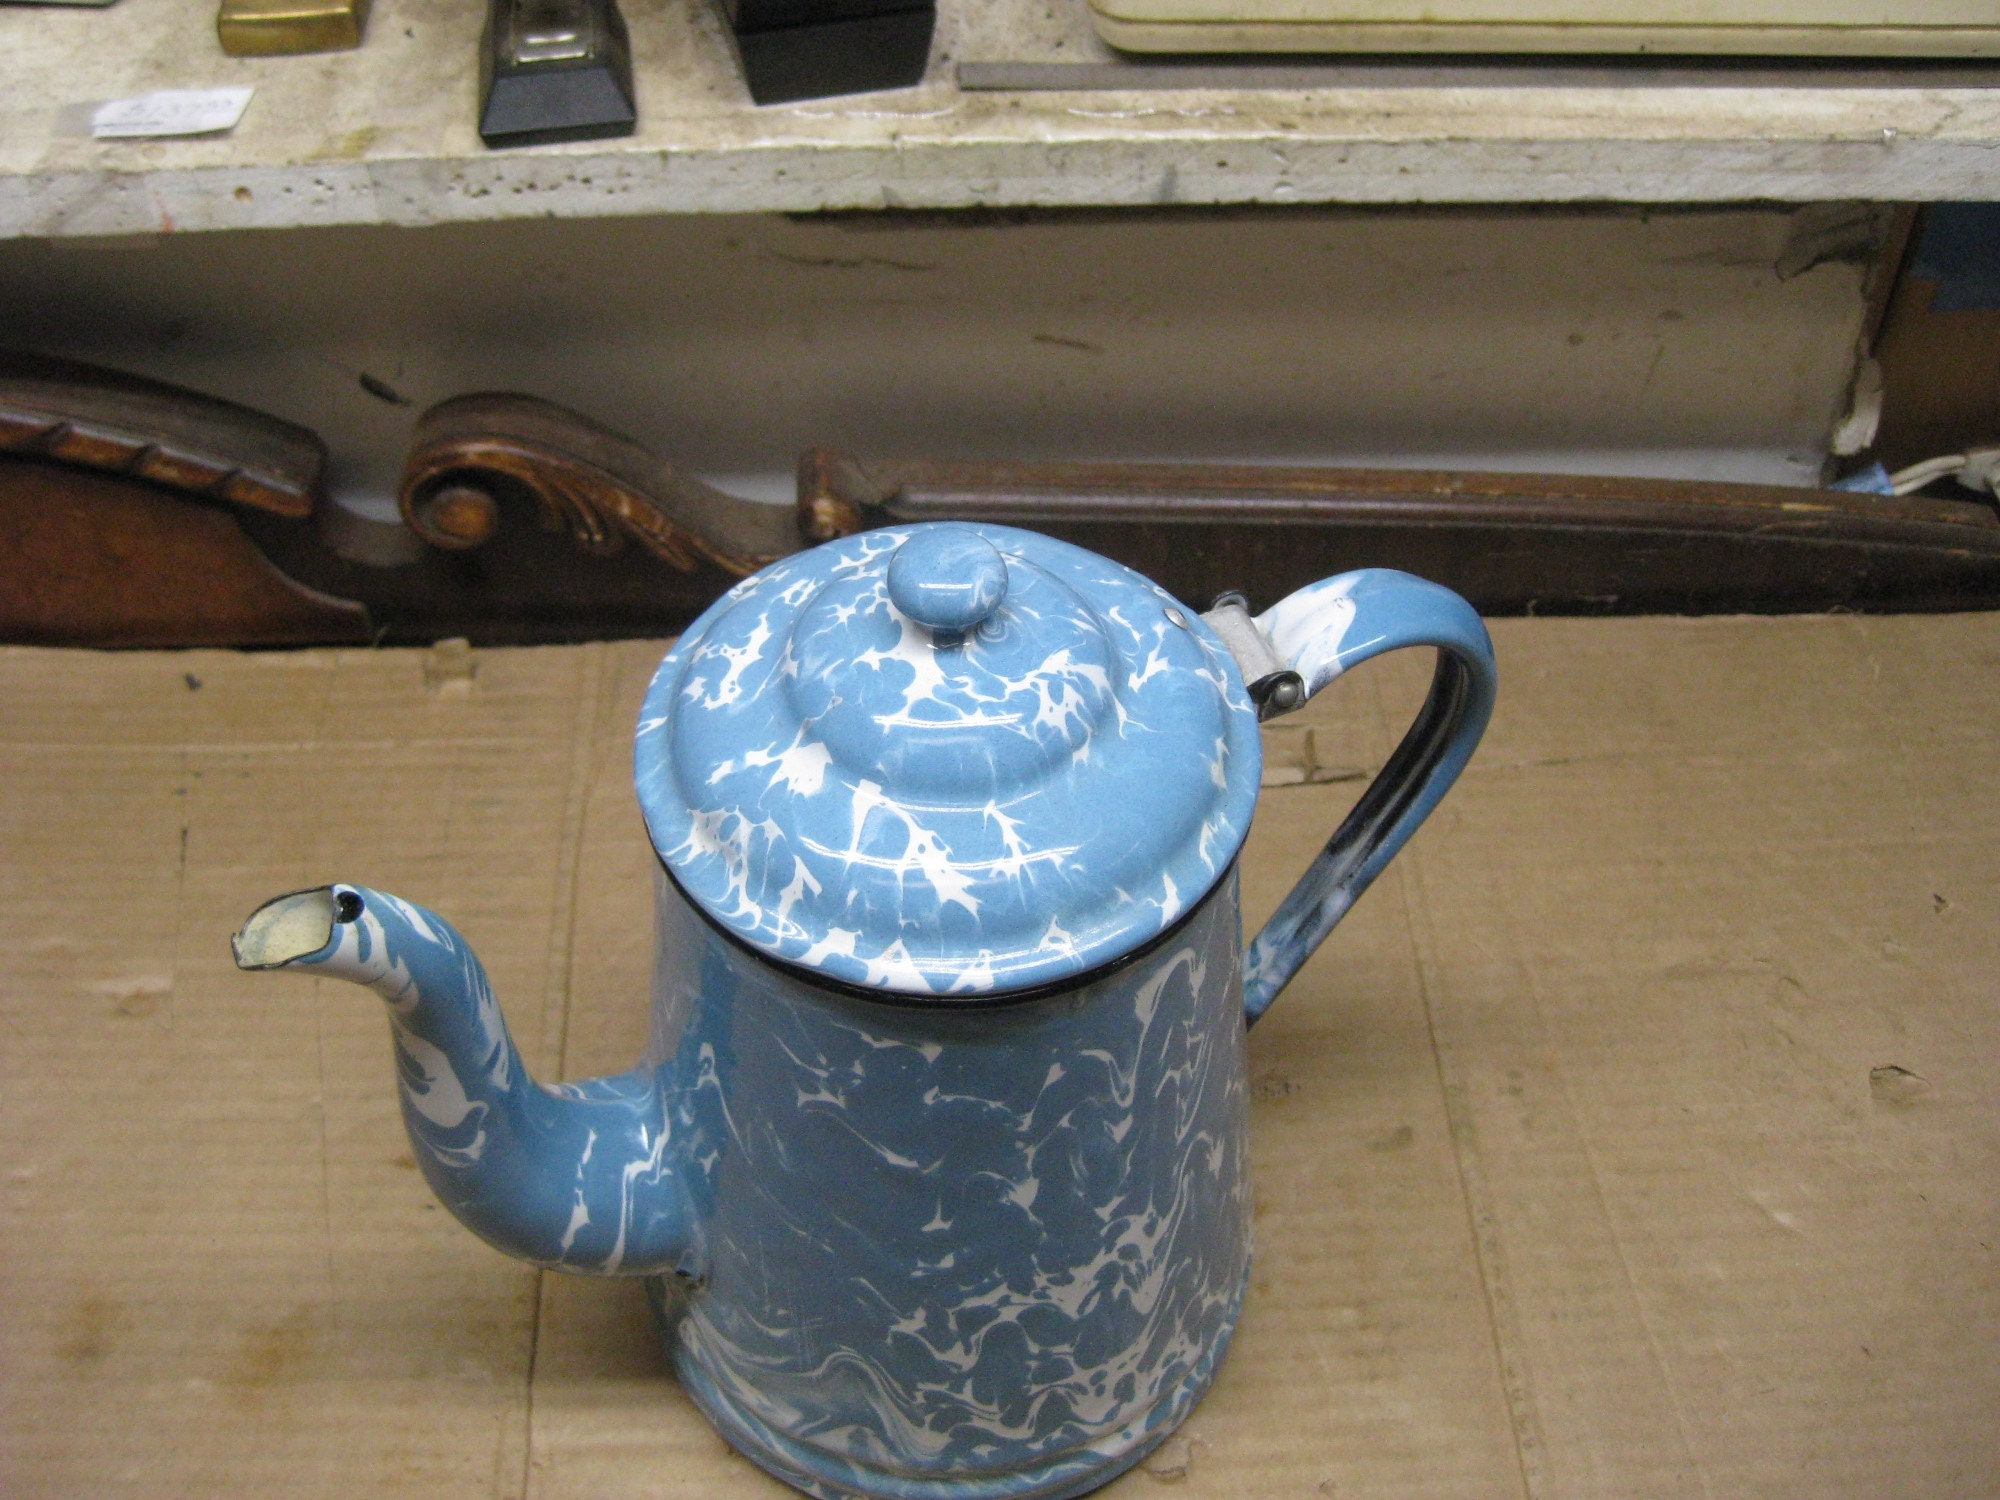 Antique Coffee Maker Enamelled White Marl Blue With Jewelery Blue Collection